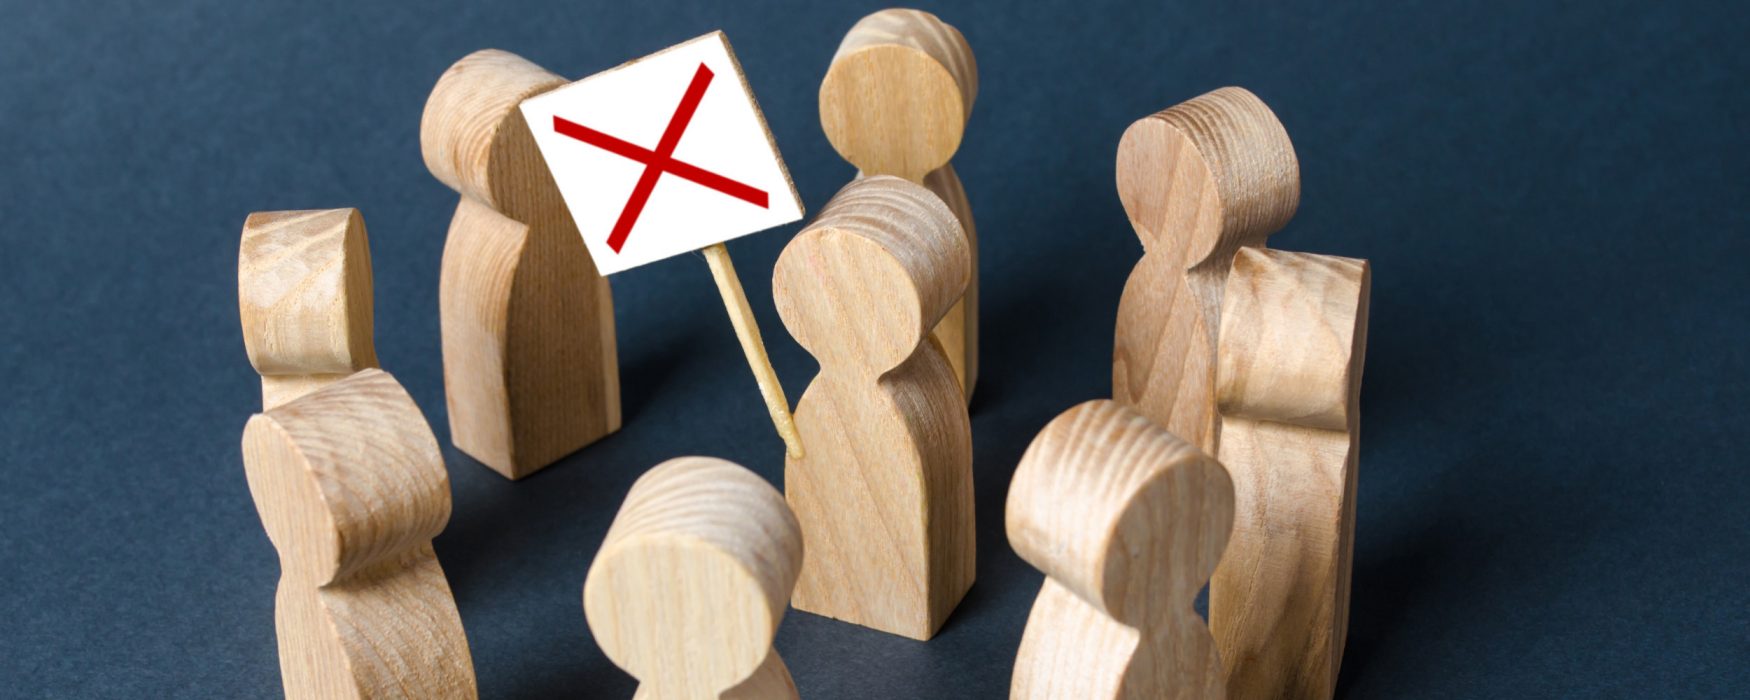 Image of a grouping of wooden blocks shaped like people, one holding a sign with a red X on it